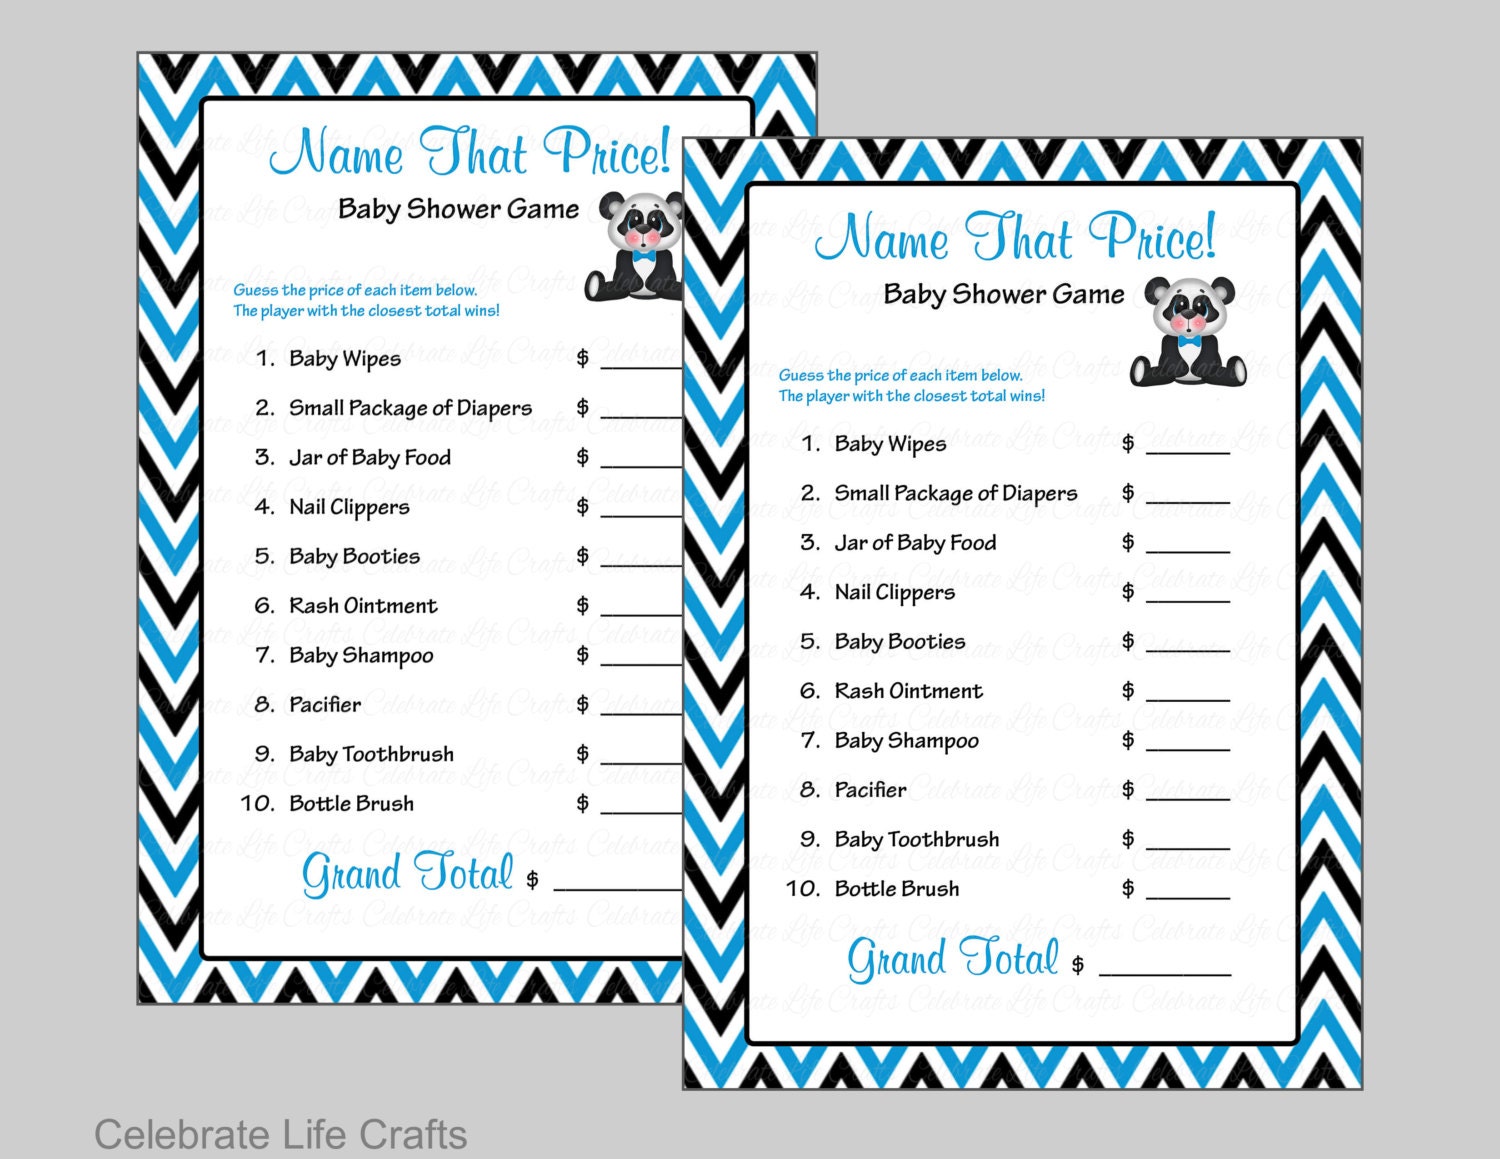 Baby Shower Name That Price Game Printable Baby Shower Games